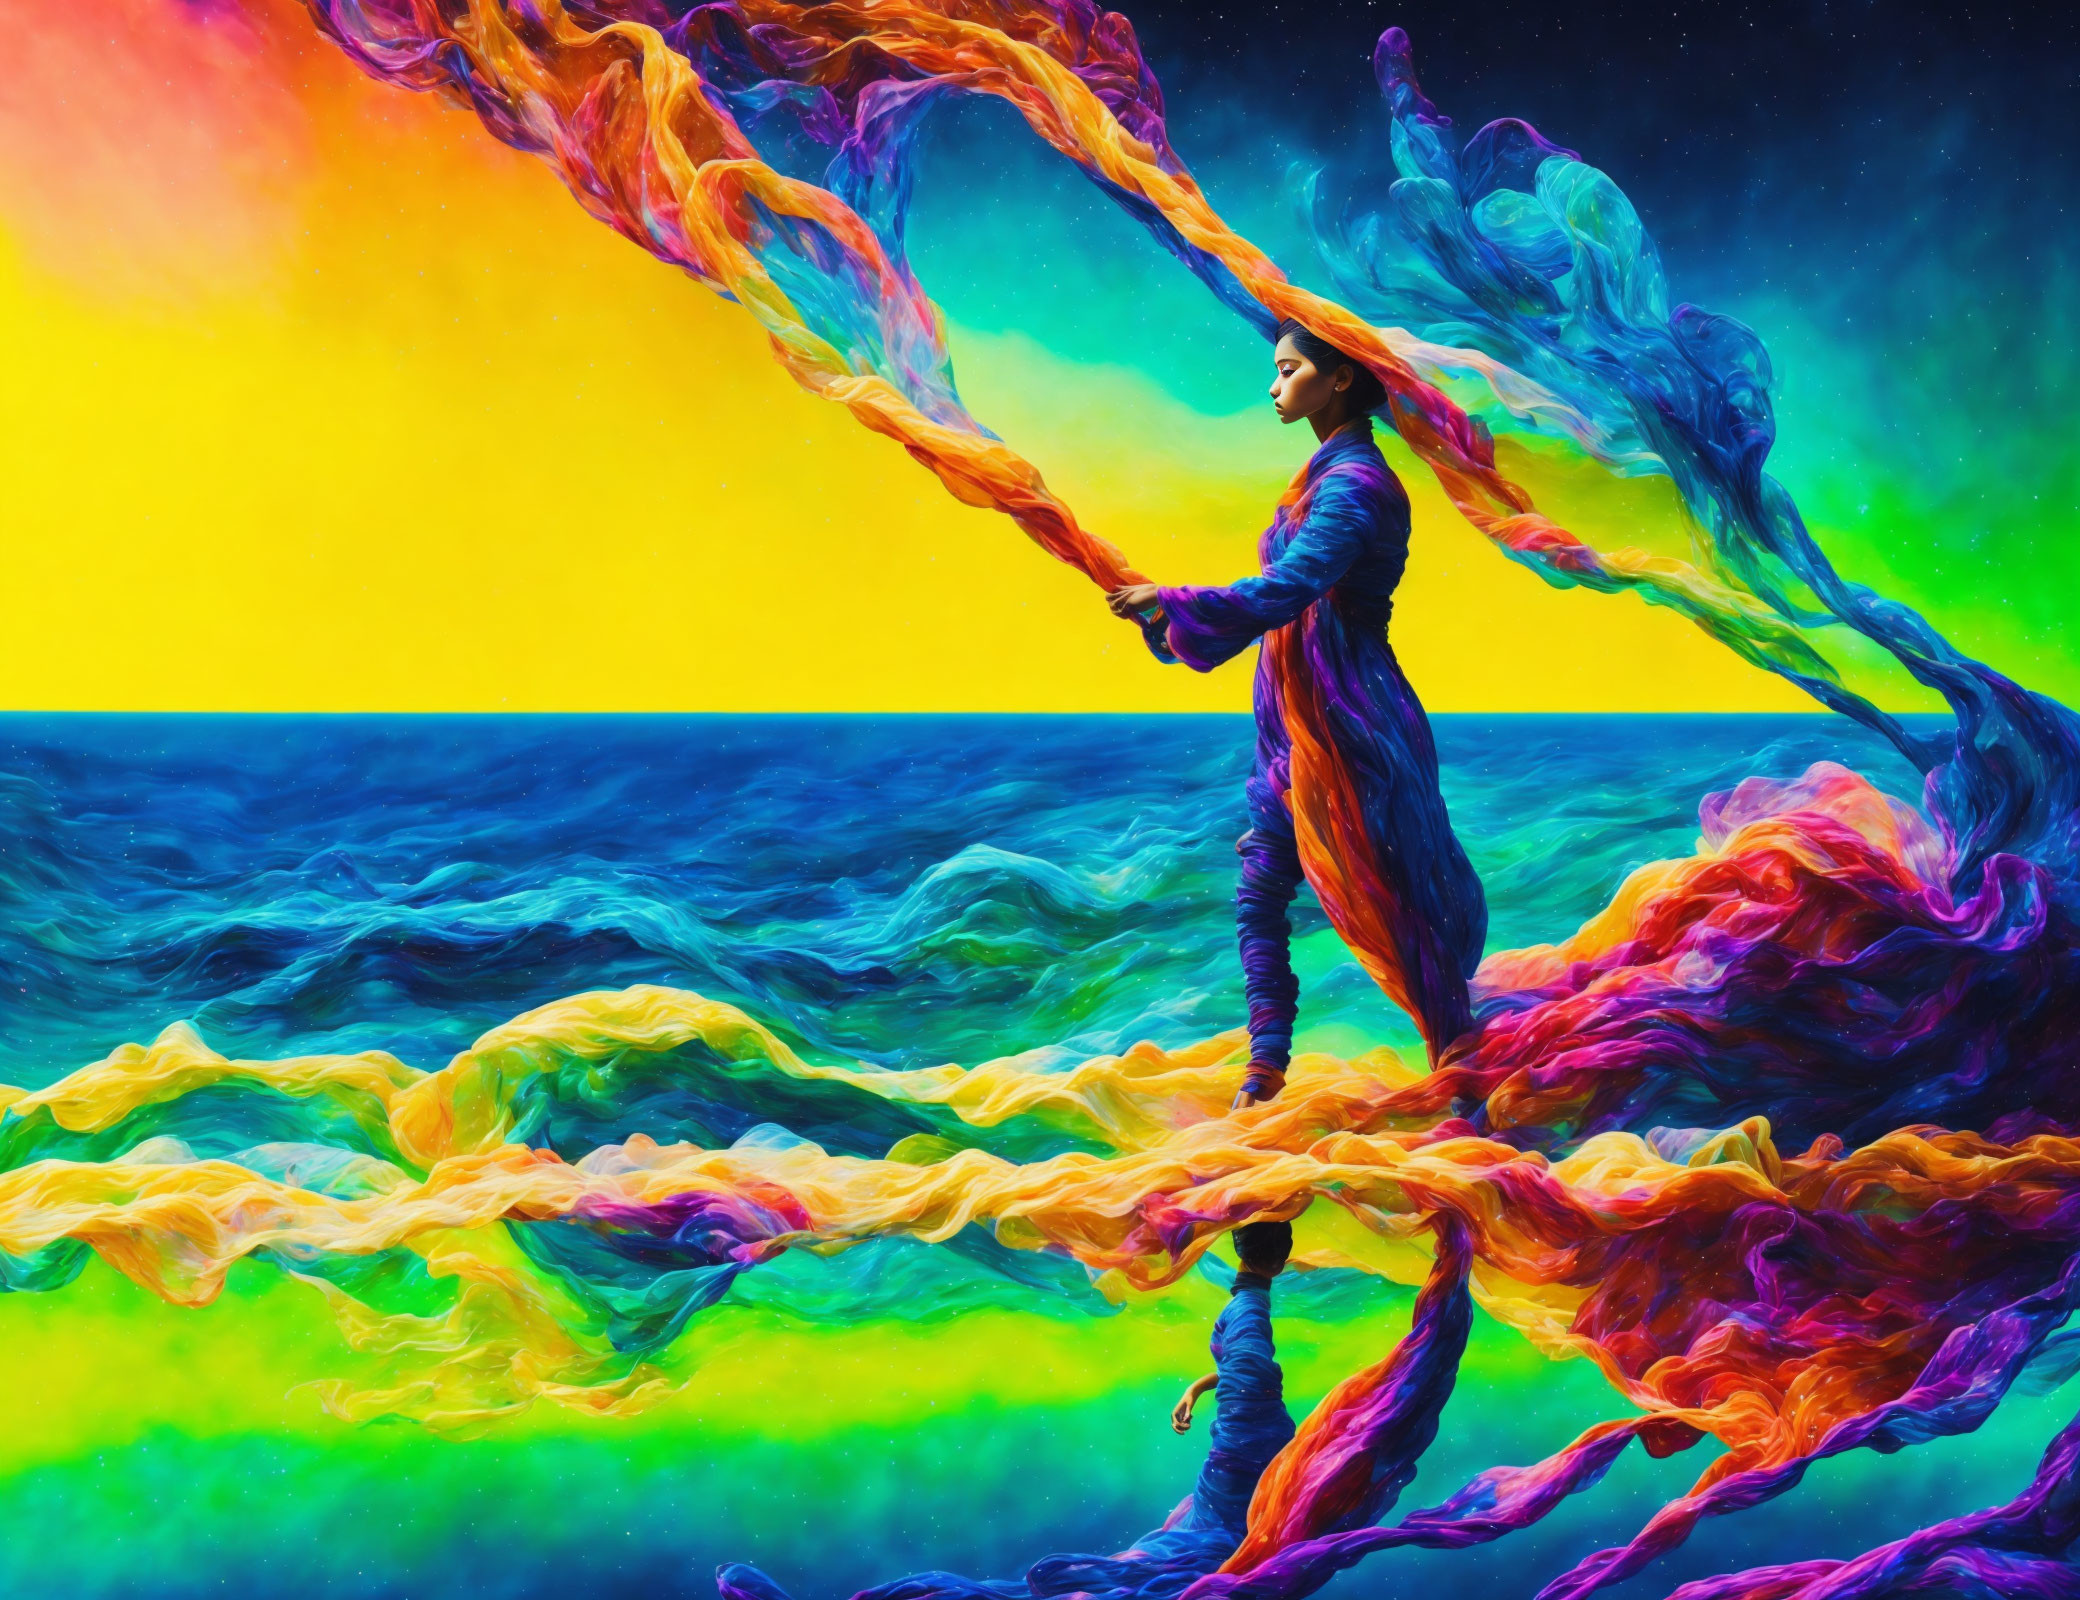 Colorful person holding flowing scarf in psychedelic sea and sunset sky